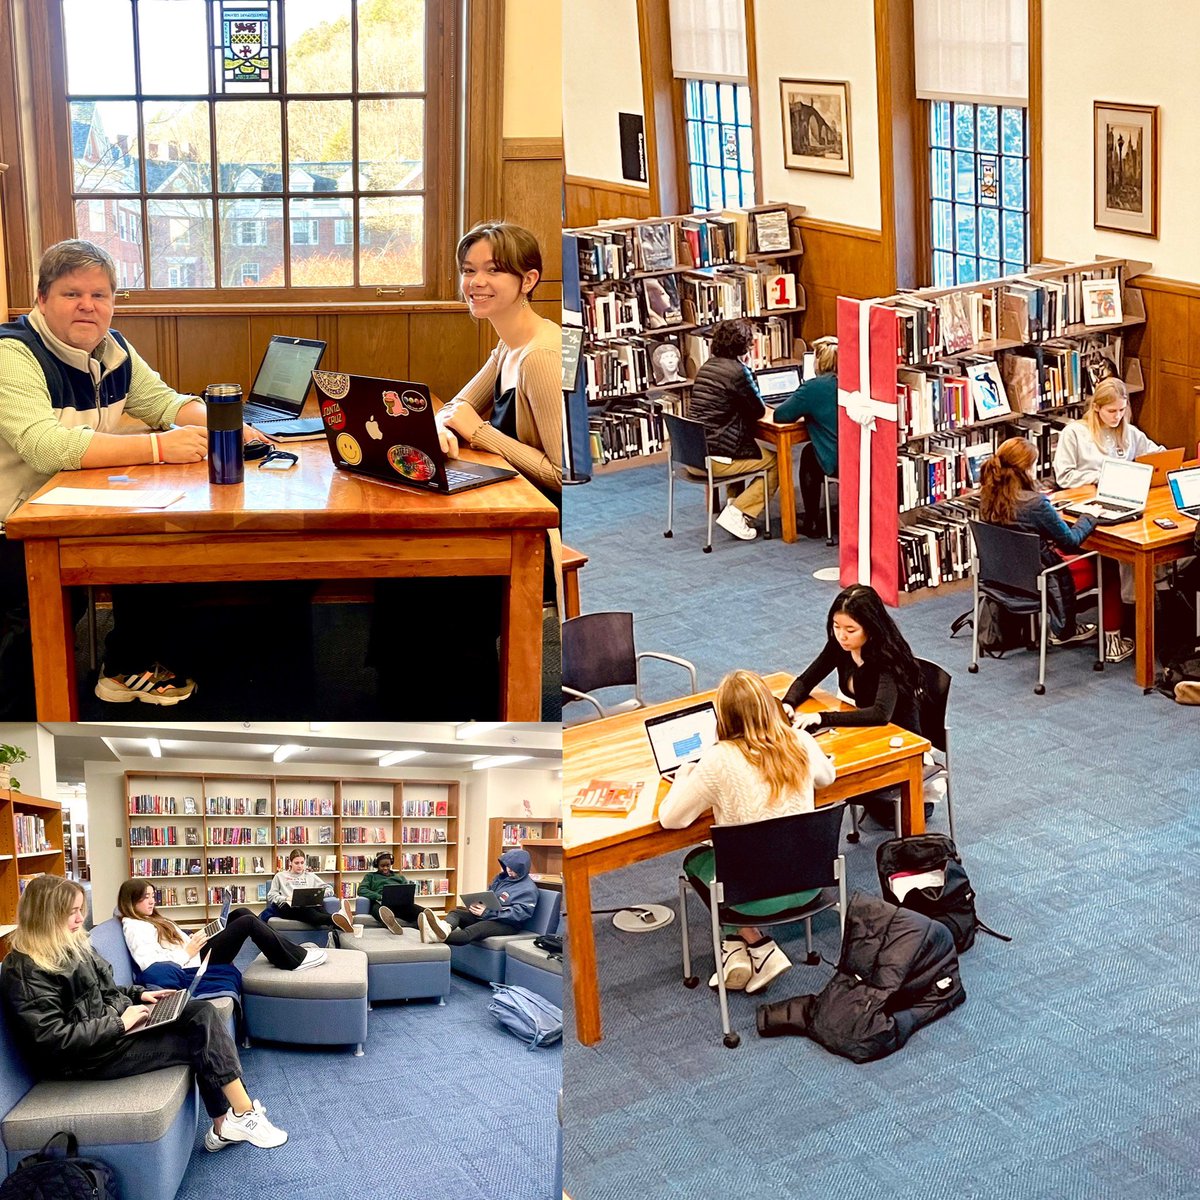 The library has been the place to be lately! Ms. Moreno's English 1, Mr. Booth's U.S. History, Ms. Wilson's English 3 and other classes have been working hard on papers, posters, and presentations. We love to see it! #library #research #schoollibrary #highschoollibrary